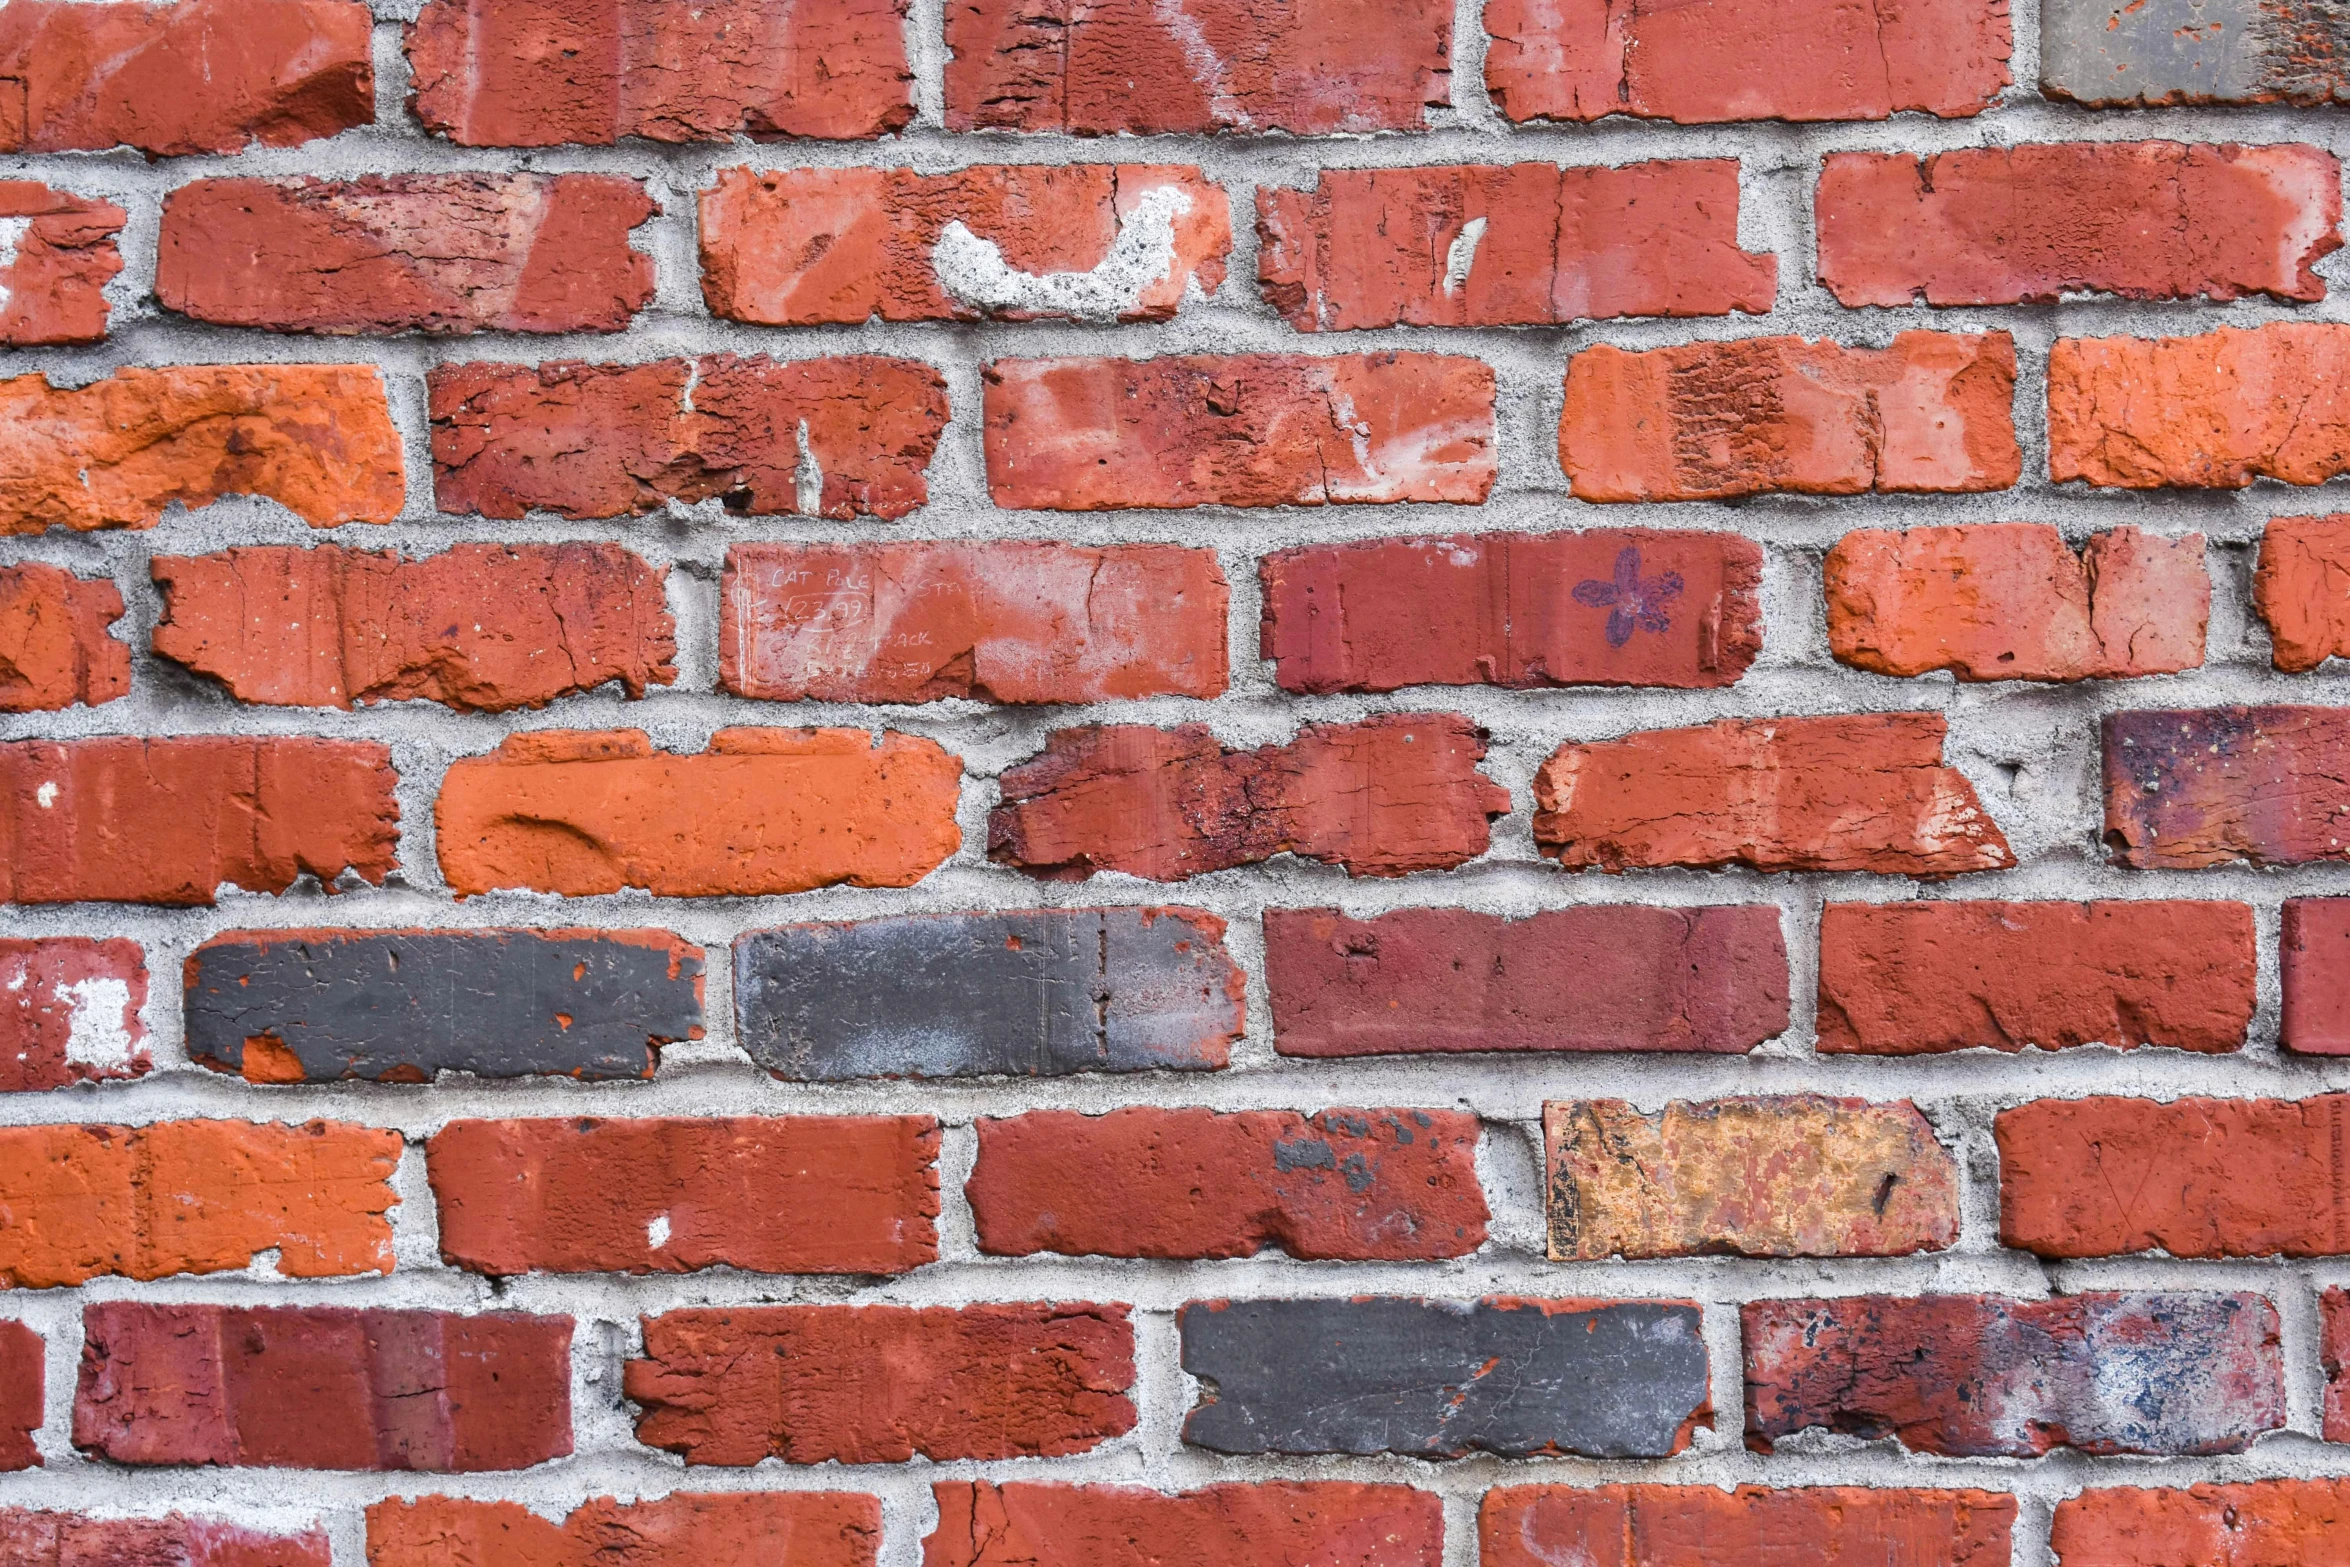 a brick wall that has been constructed from several small blocks